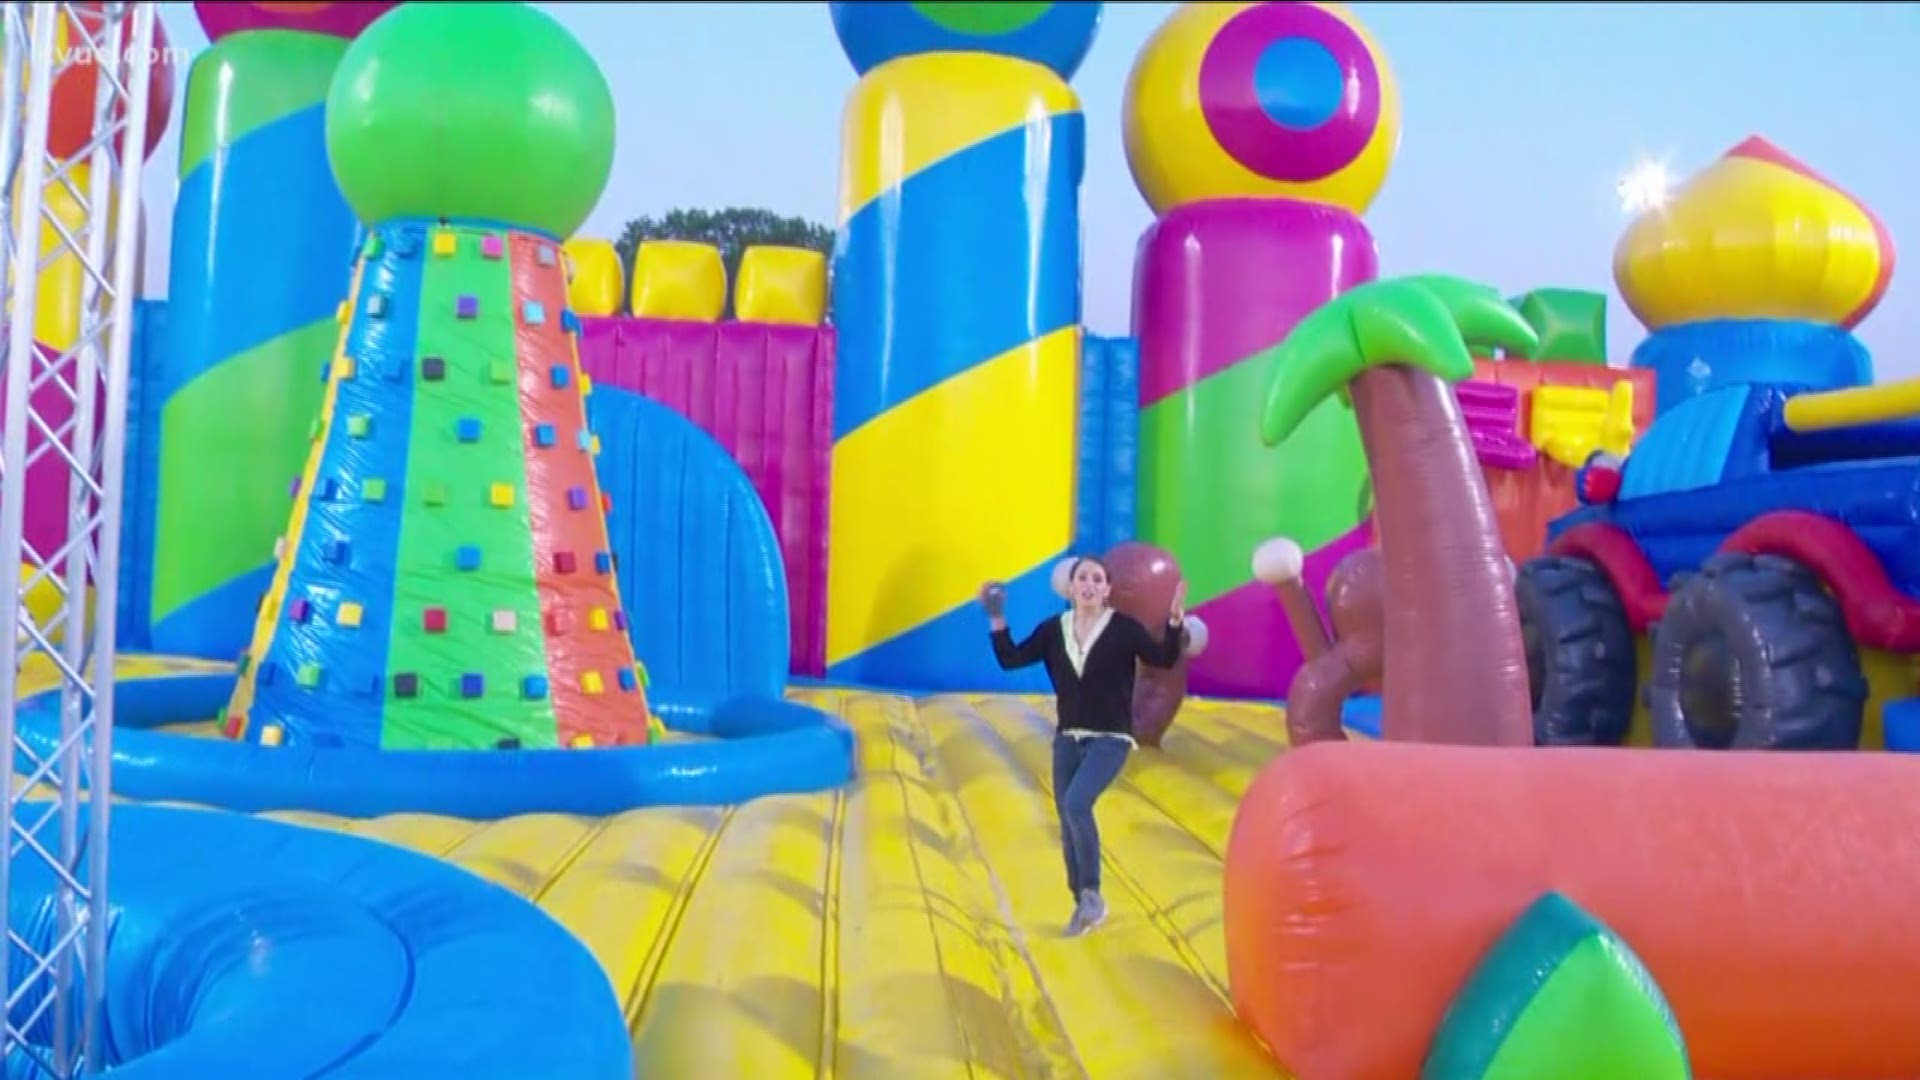 When was the last time you set foot in a bounce house? Well, now you can relive those childhood memories at Big Bounce America in Austin this weekend.